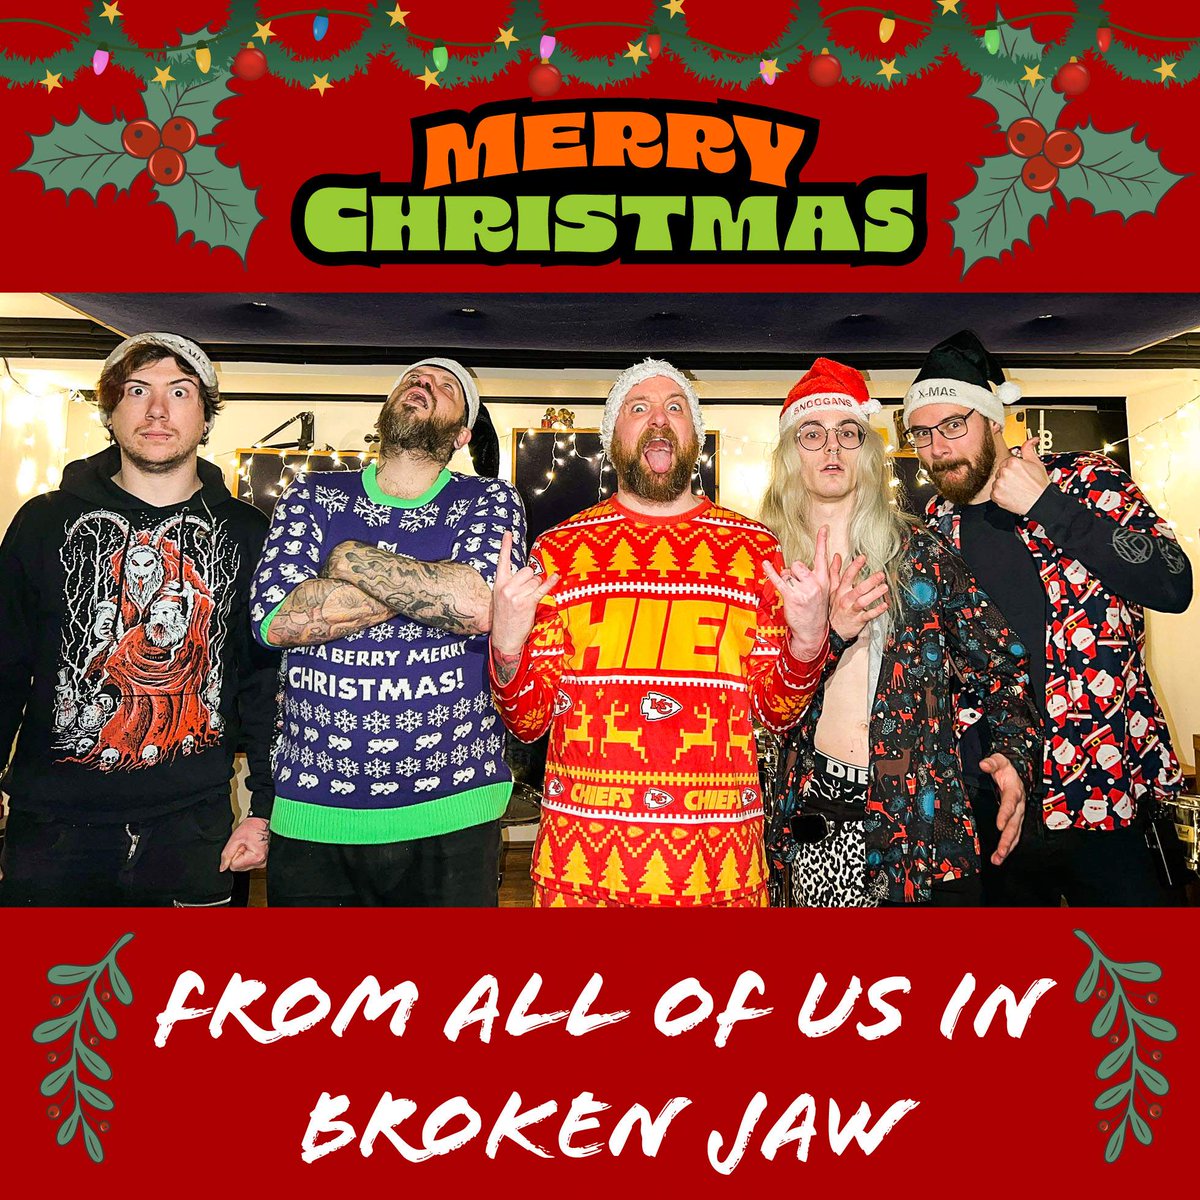 🎅MERRY CHRISTMAS FROM ALL OF US AT BROKEN JAW 👊🏻 We hope you have a wonderful Christmas and a Happy New Year!!! ☃️🎄
#BROKENJAW💀
#christmas
#UK #punk #punkrock #metal #metalmusic #bjparty #tellhopewerecoming #oraclemanagement #fuelledbyfireball #theoraclerecords #theoraclemgmt